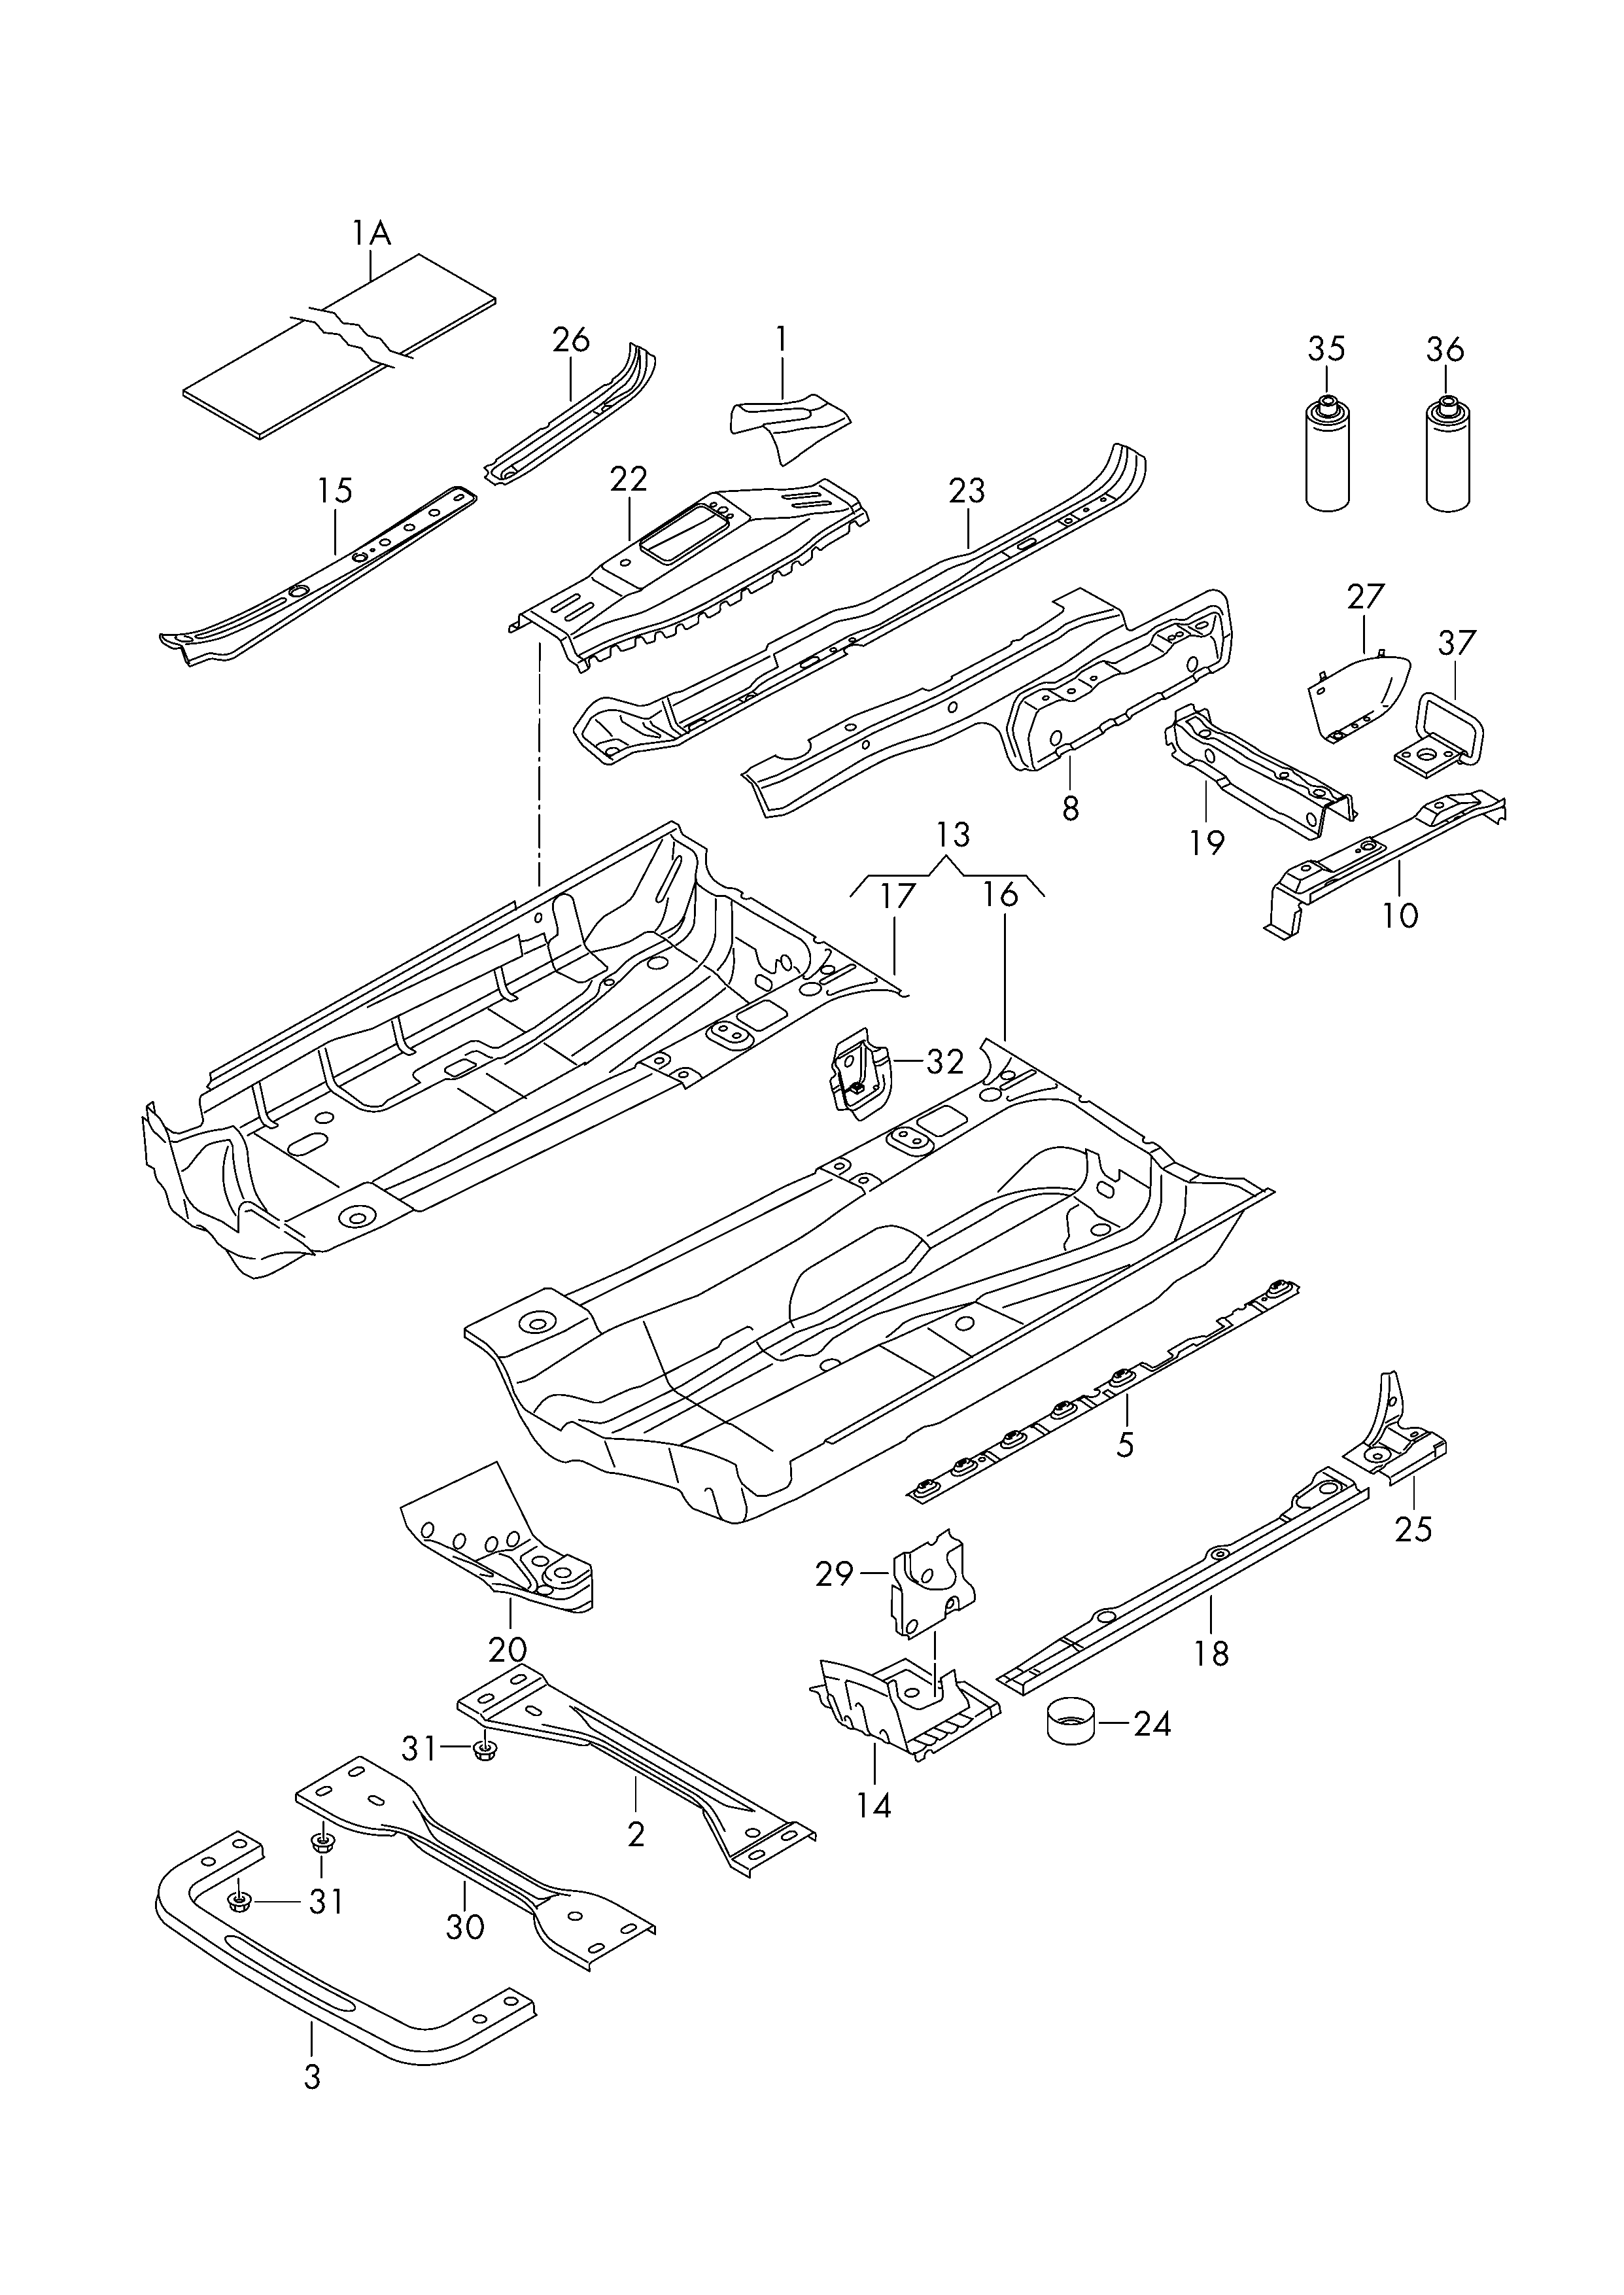 Bottom plate front - Caddy - cad